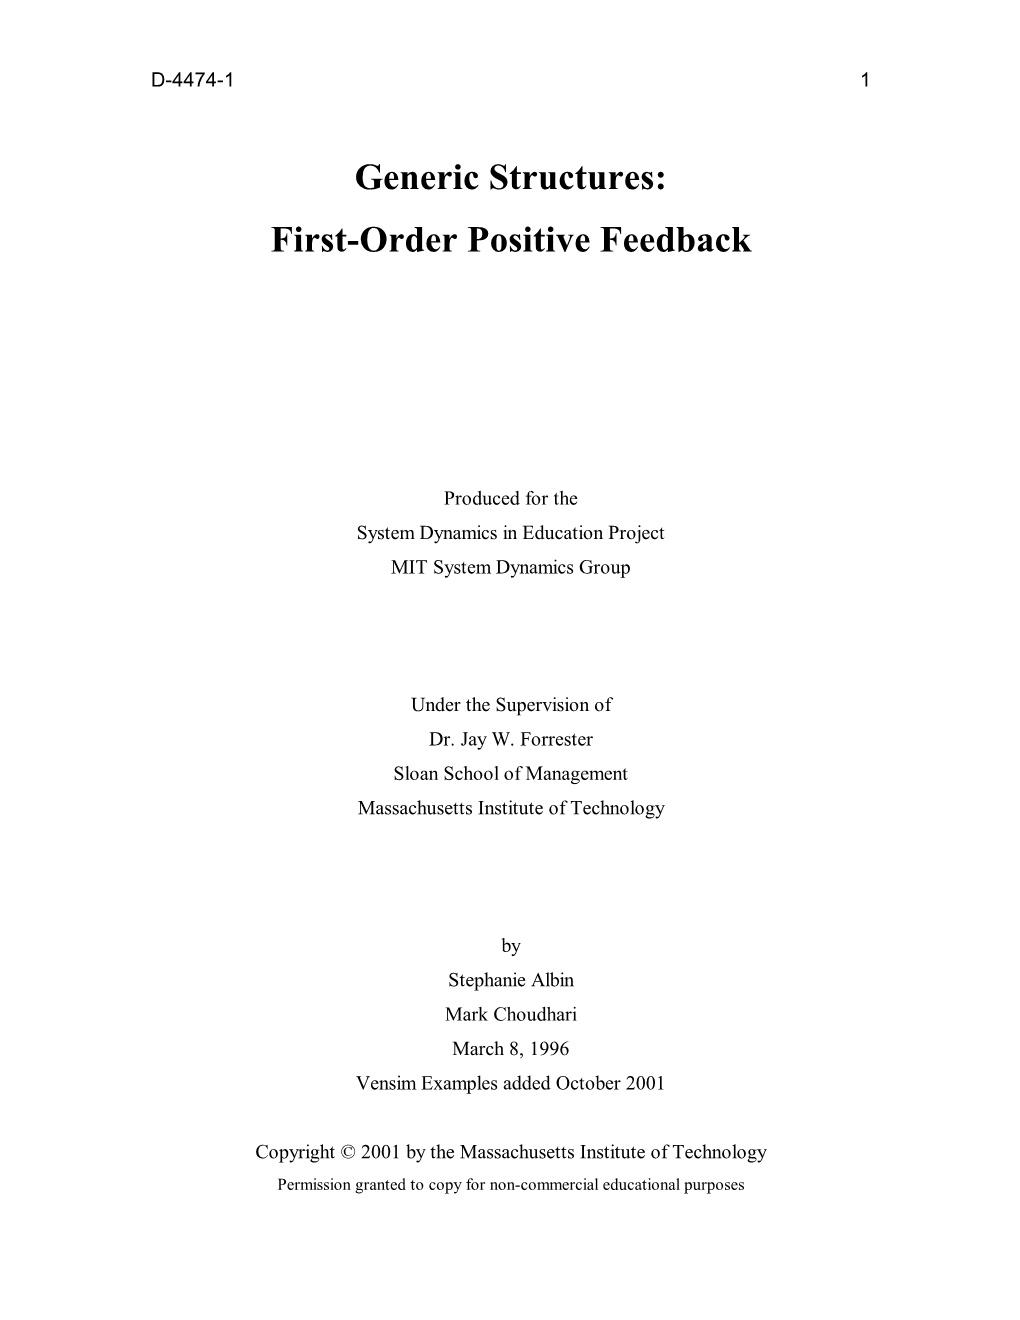 Generic Structures: First-Order Positive Feedback